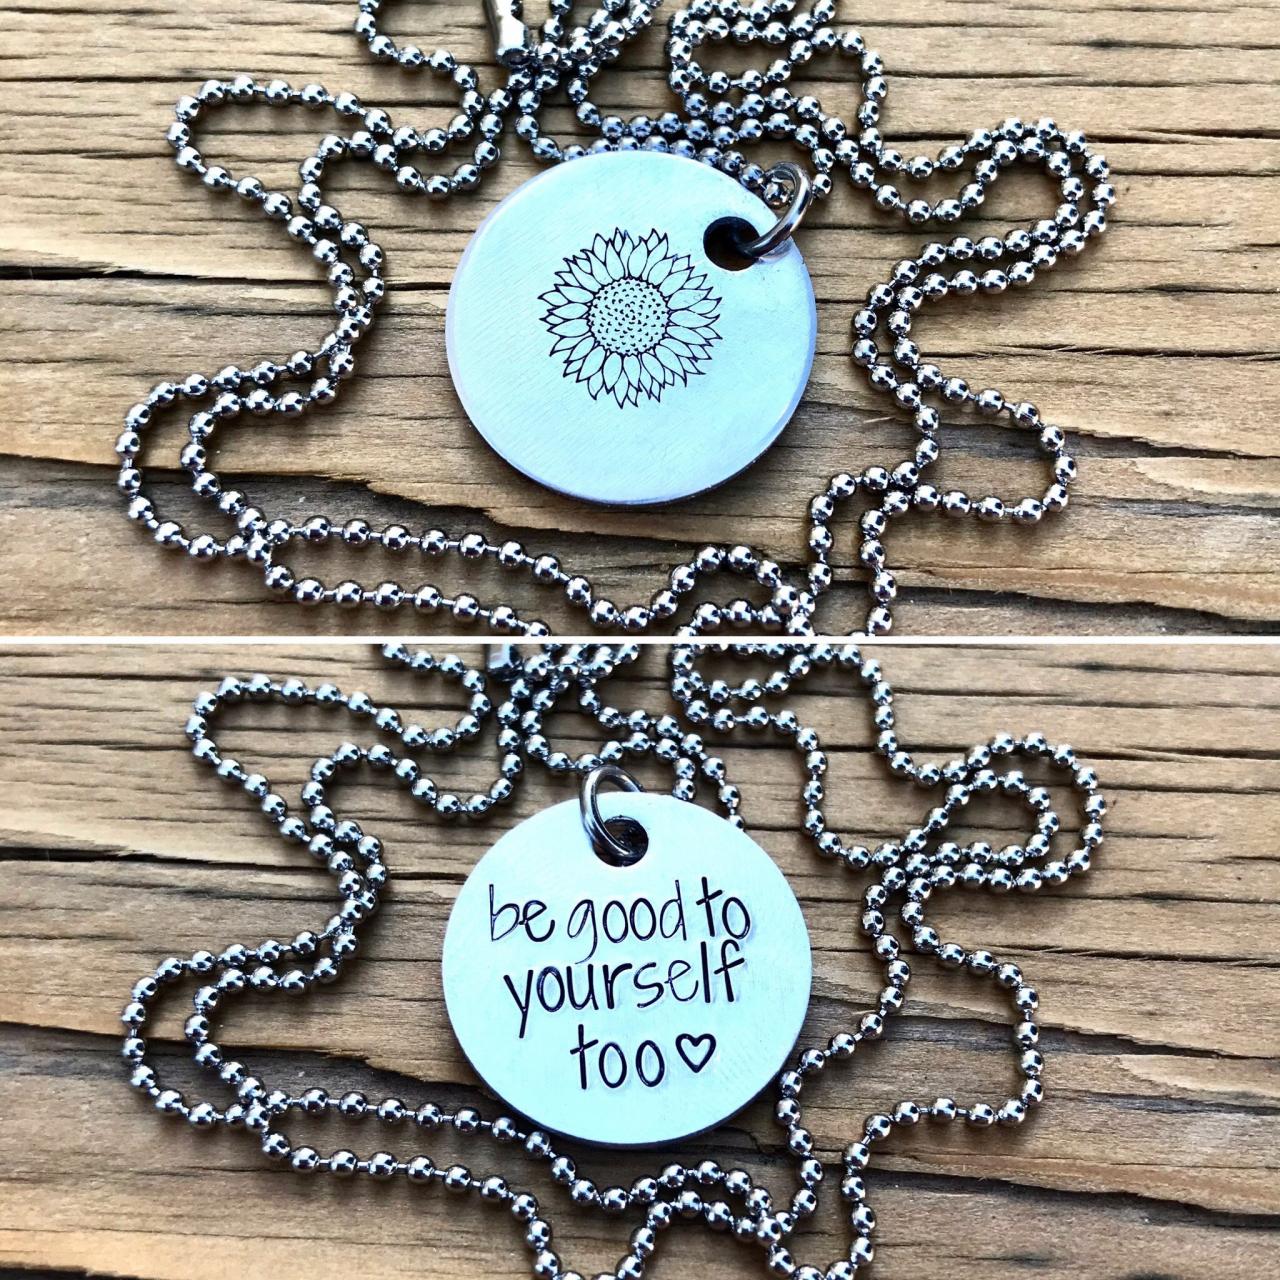 Double Sided, Sunflower, Secret Message, Ball Chain, Aluminum Fancy, Lightweight, Love, Thoughtful Gift, Necklace, Silver